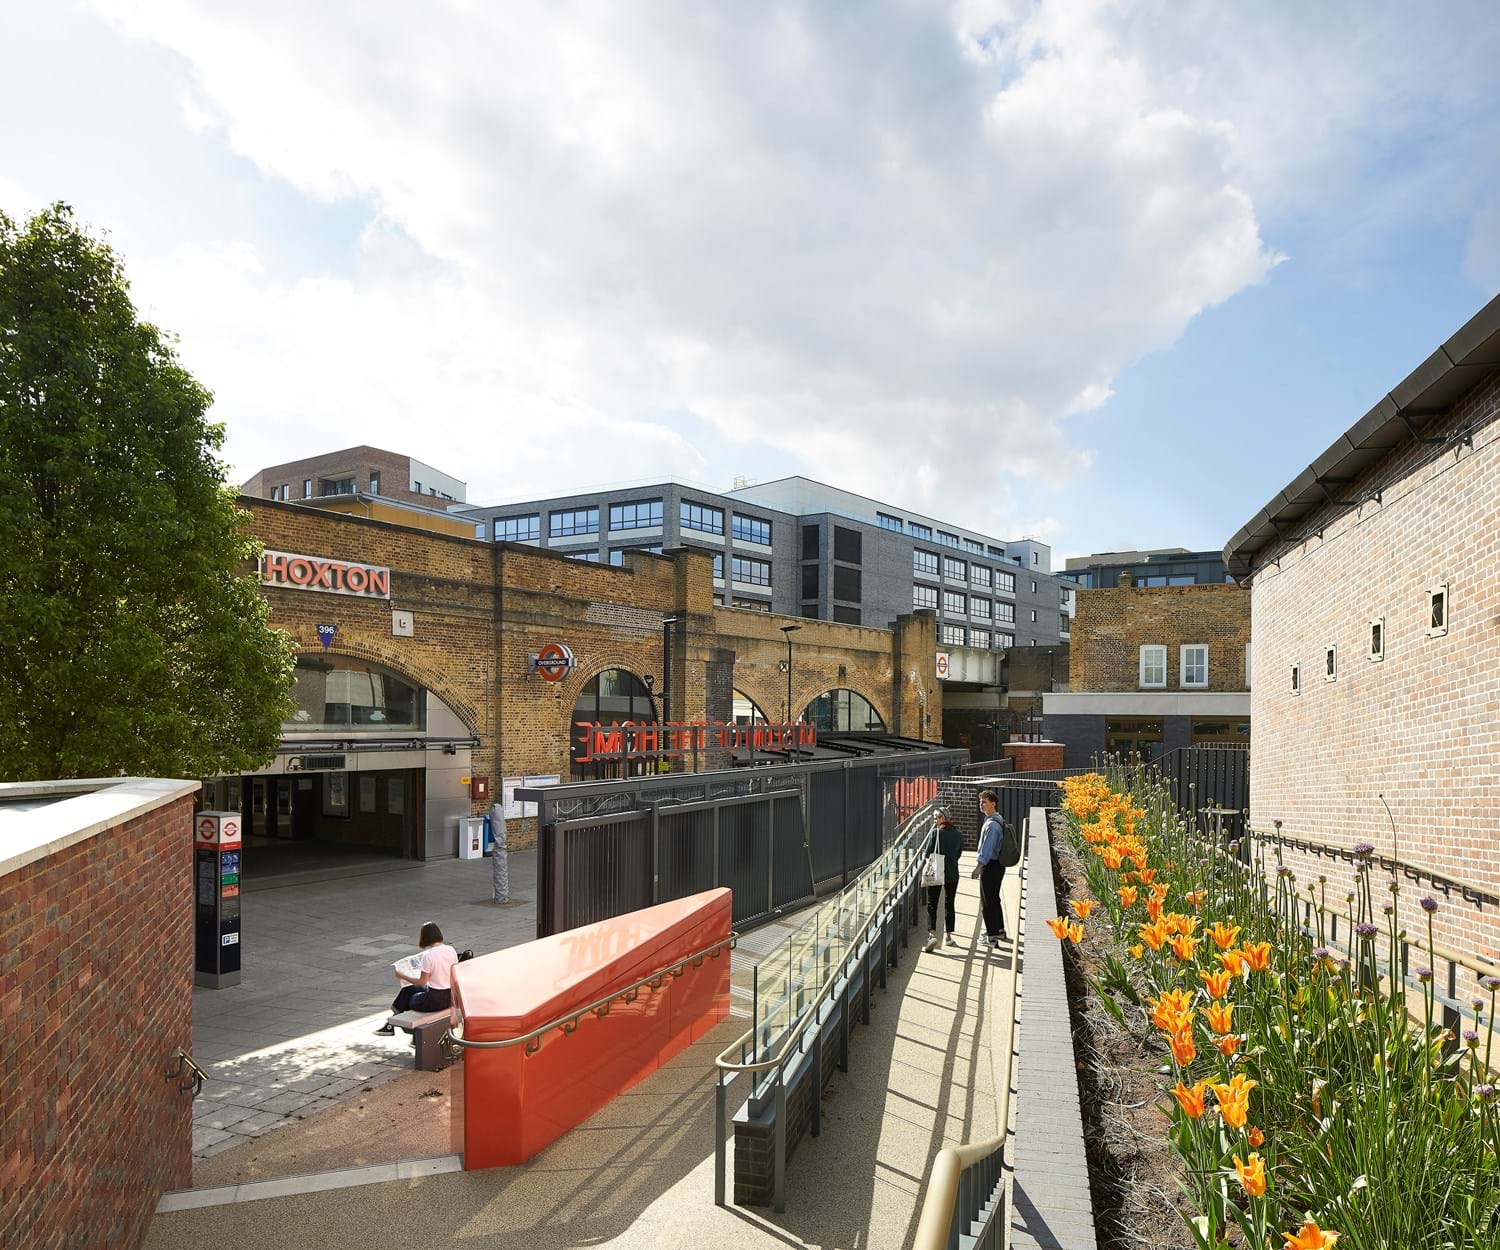 Entrance to Museum of the Home with Hoxton overground station visible in the background and a wheelchair accessible pathway lined with flowers to enter the museum